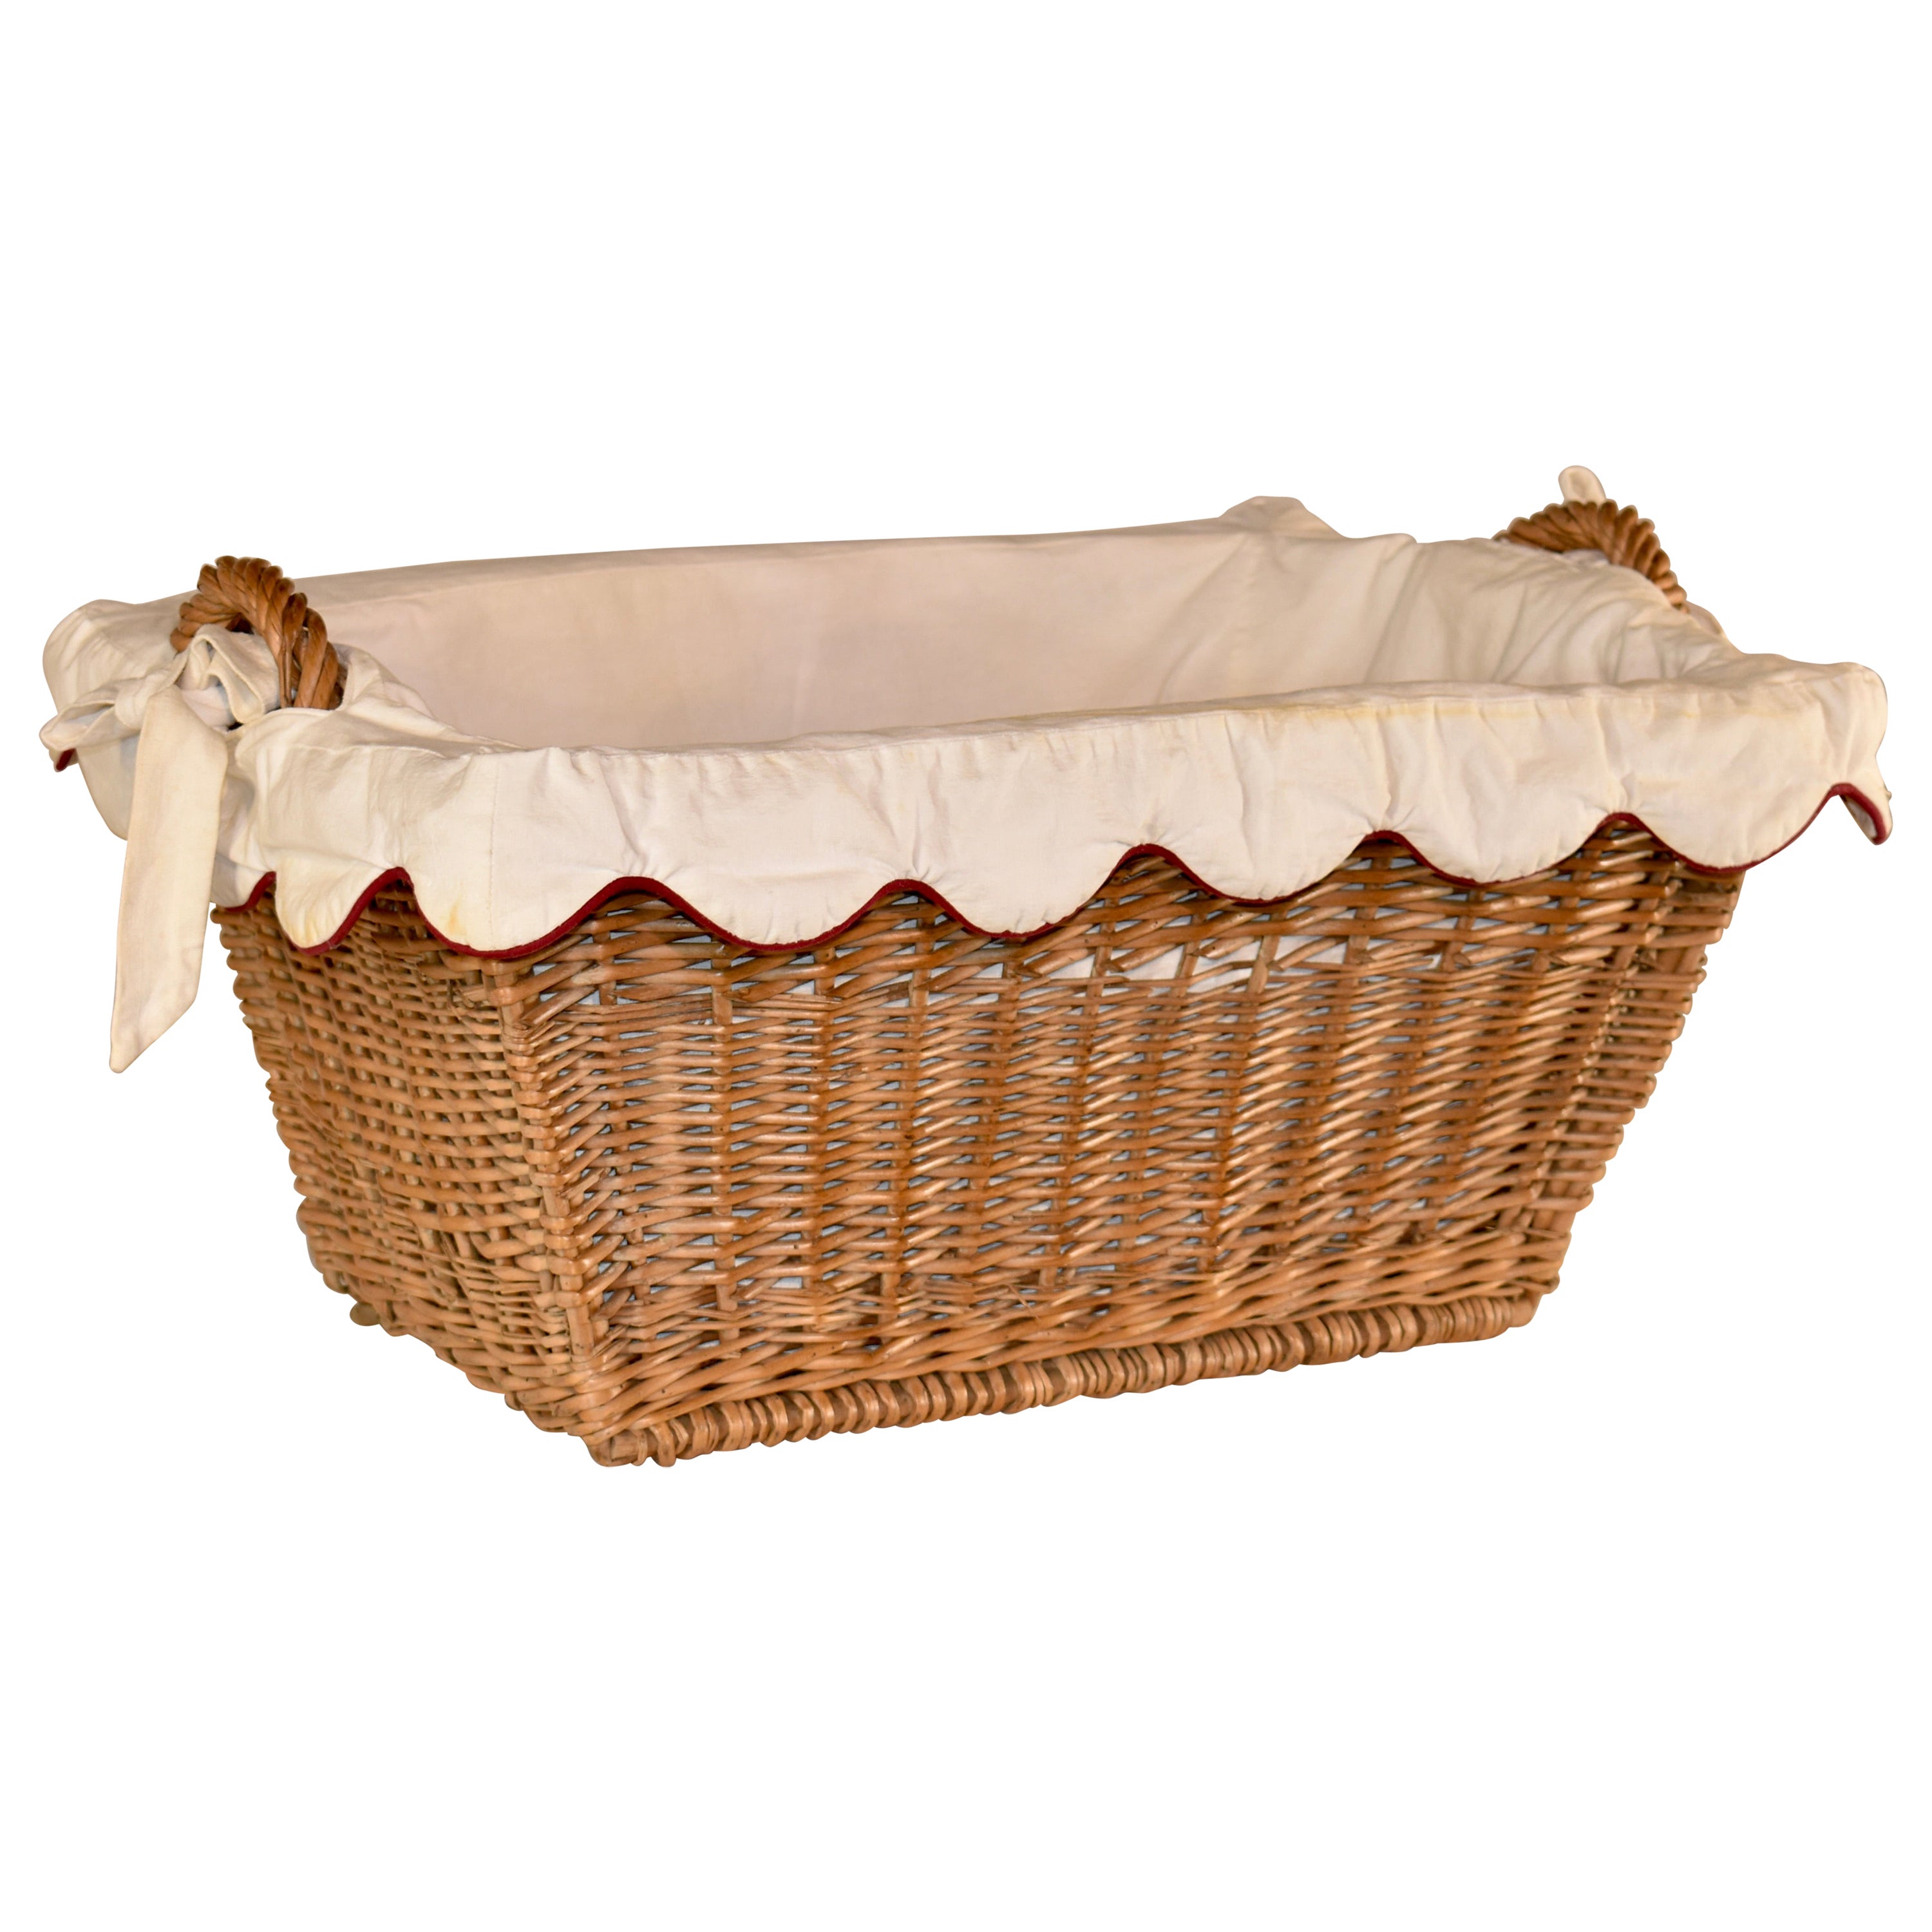 Circa 1920 French Laundry Basket For Sale